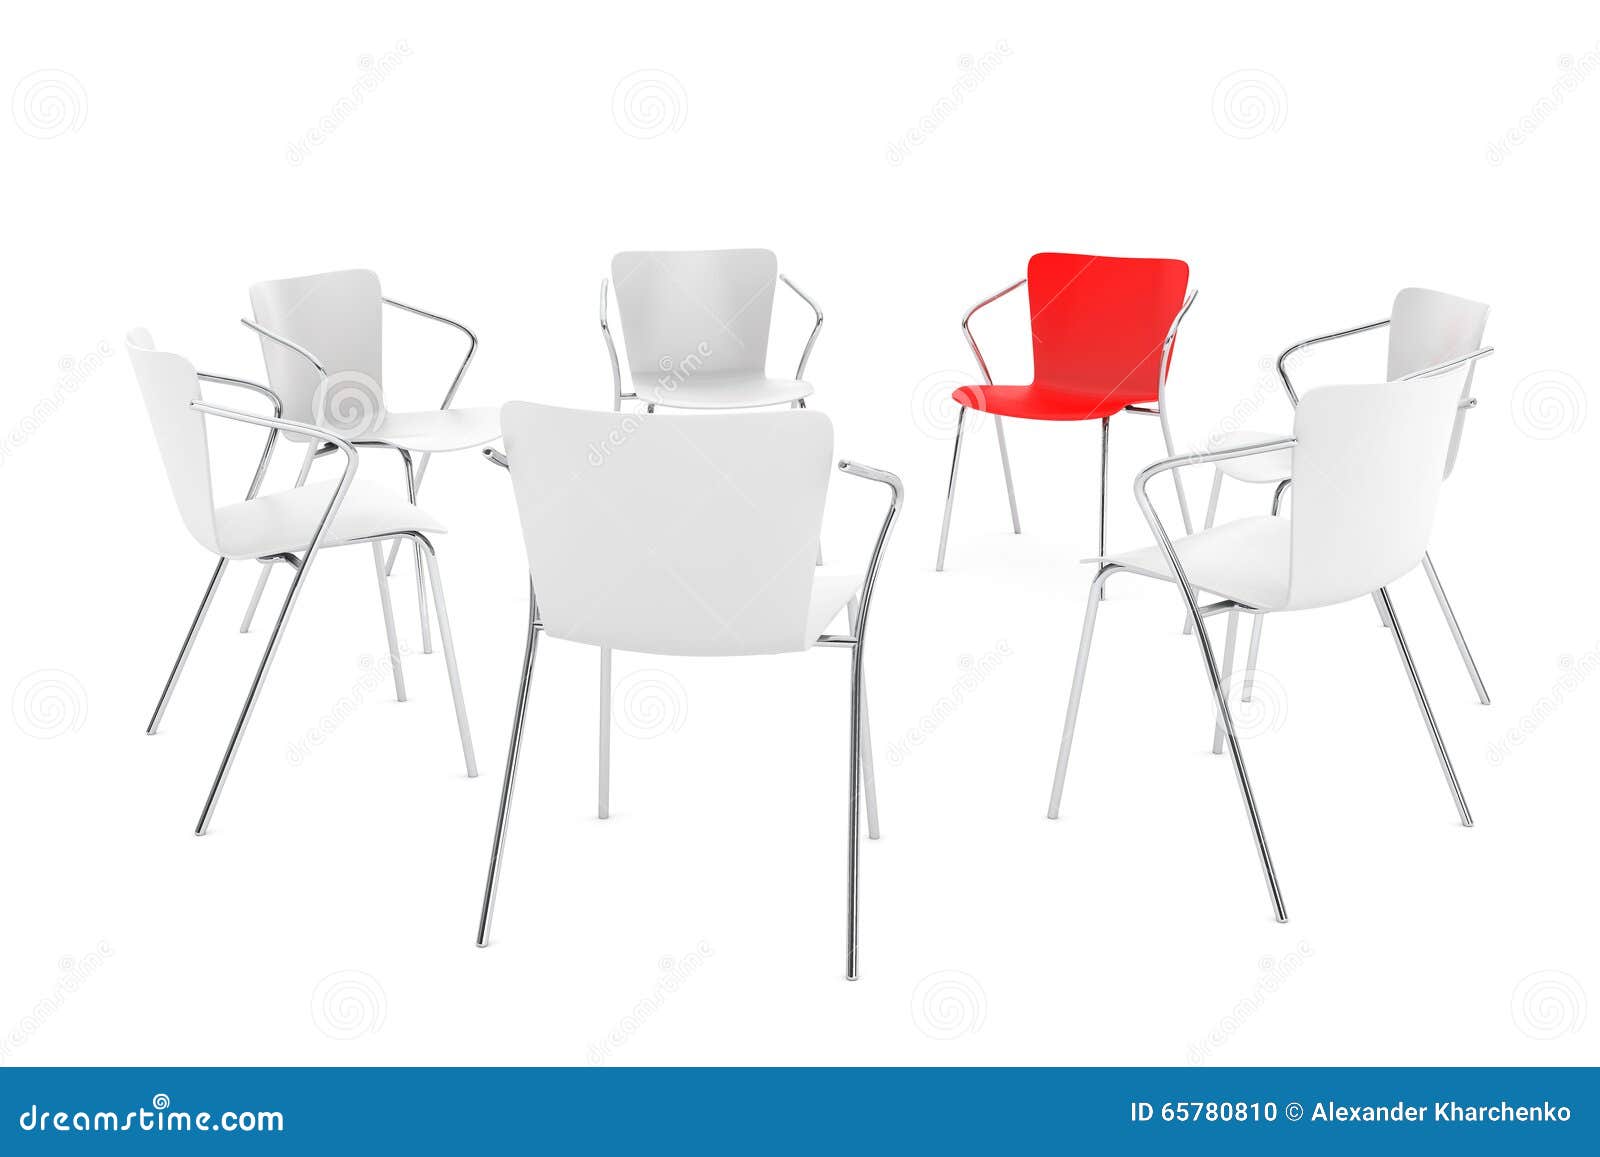 Business Large Meeting. Chairs Arranging Round with Boss Chair Stock ...